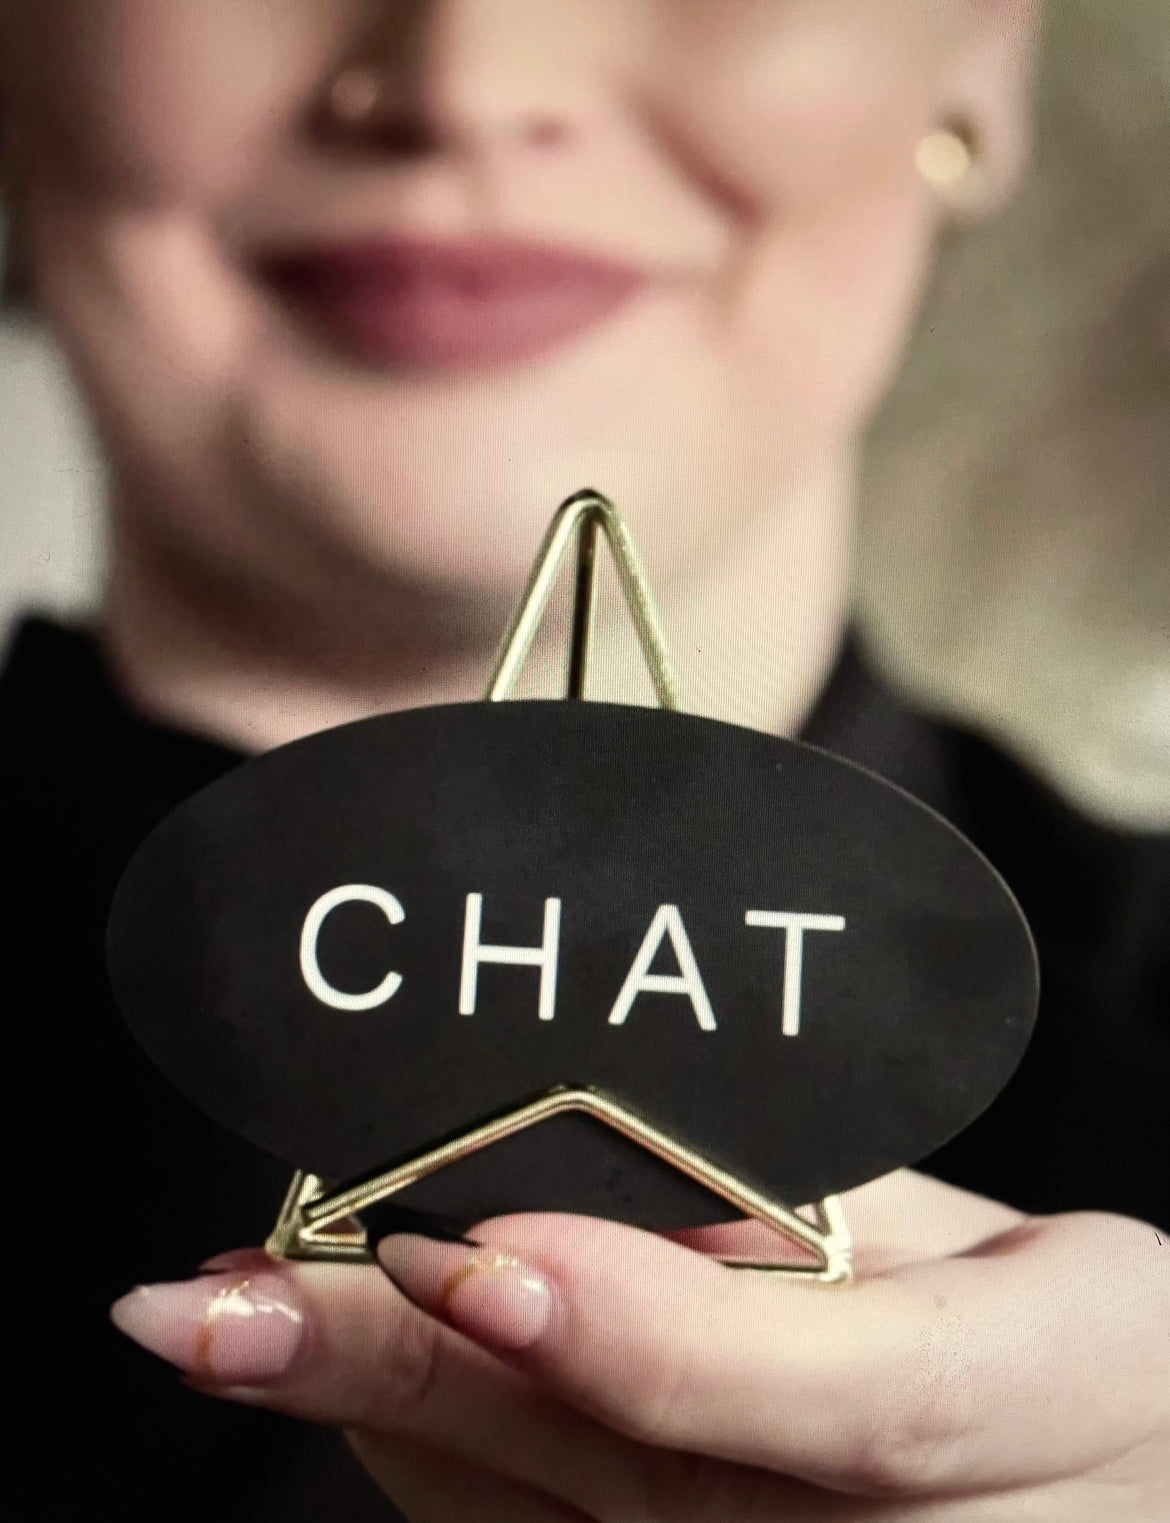 Person in black clothing, describing and holding a device used at a salon to express "chat" or "chill"